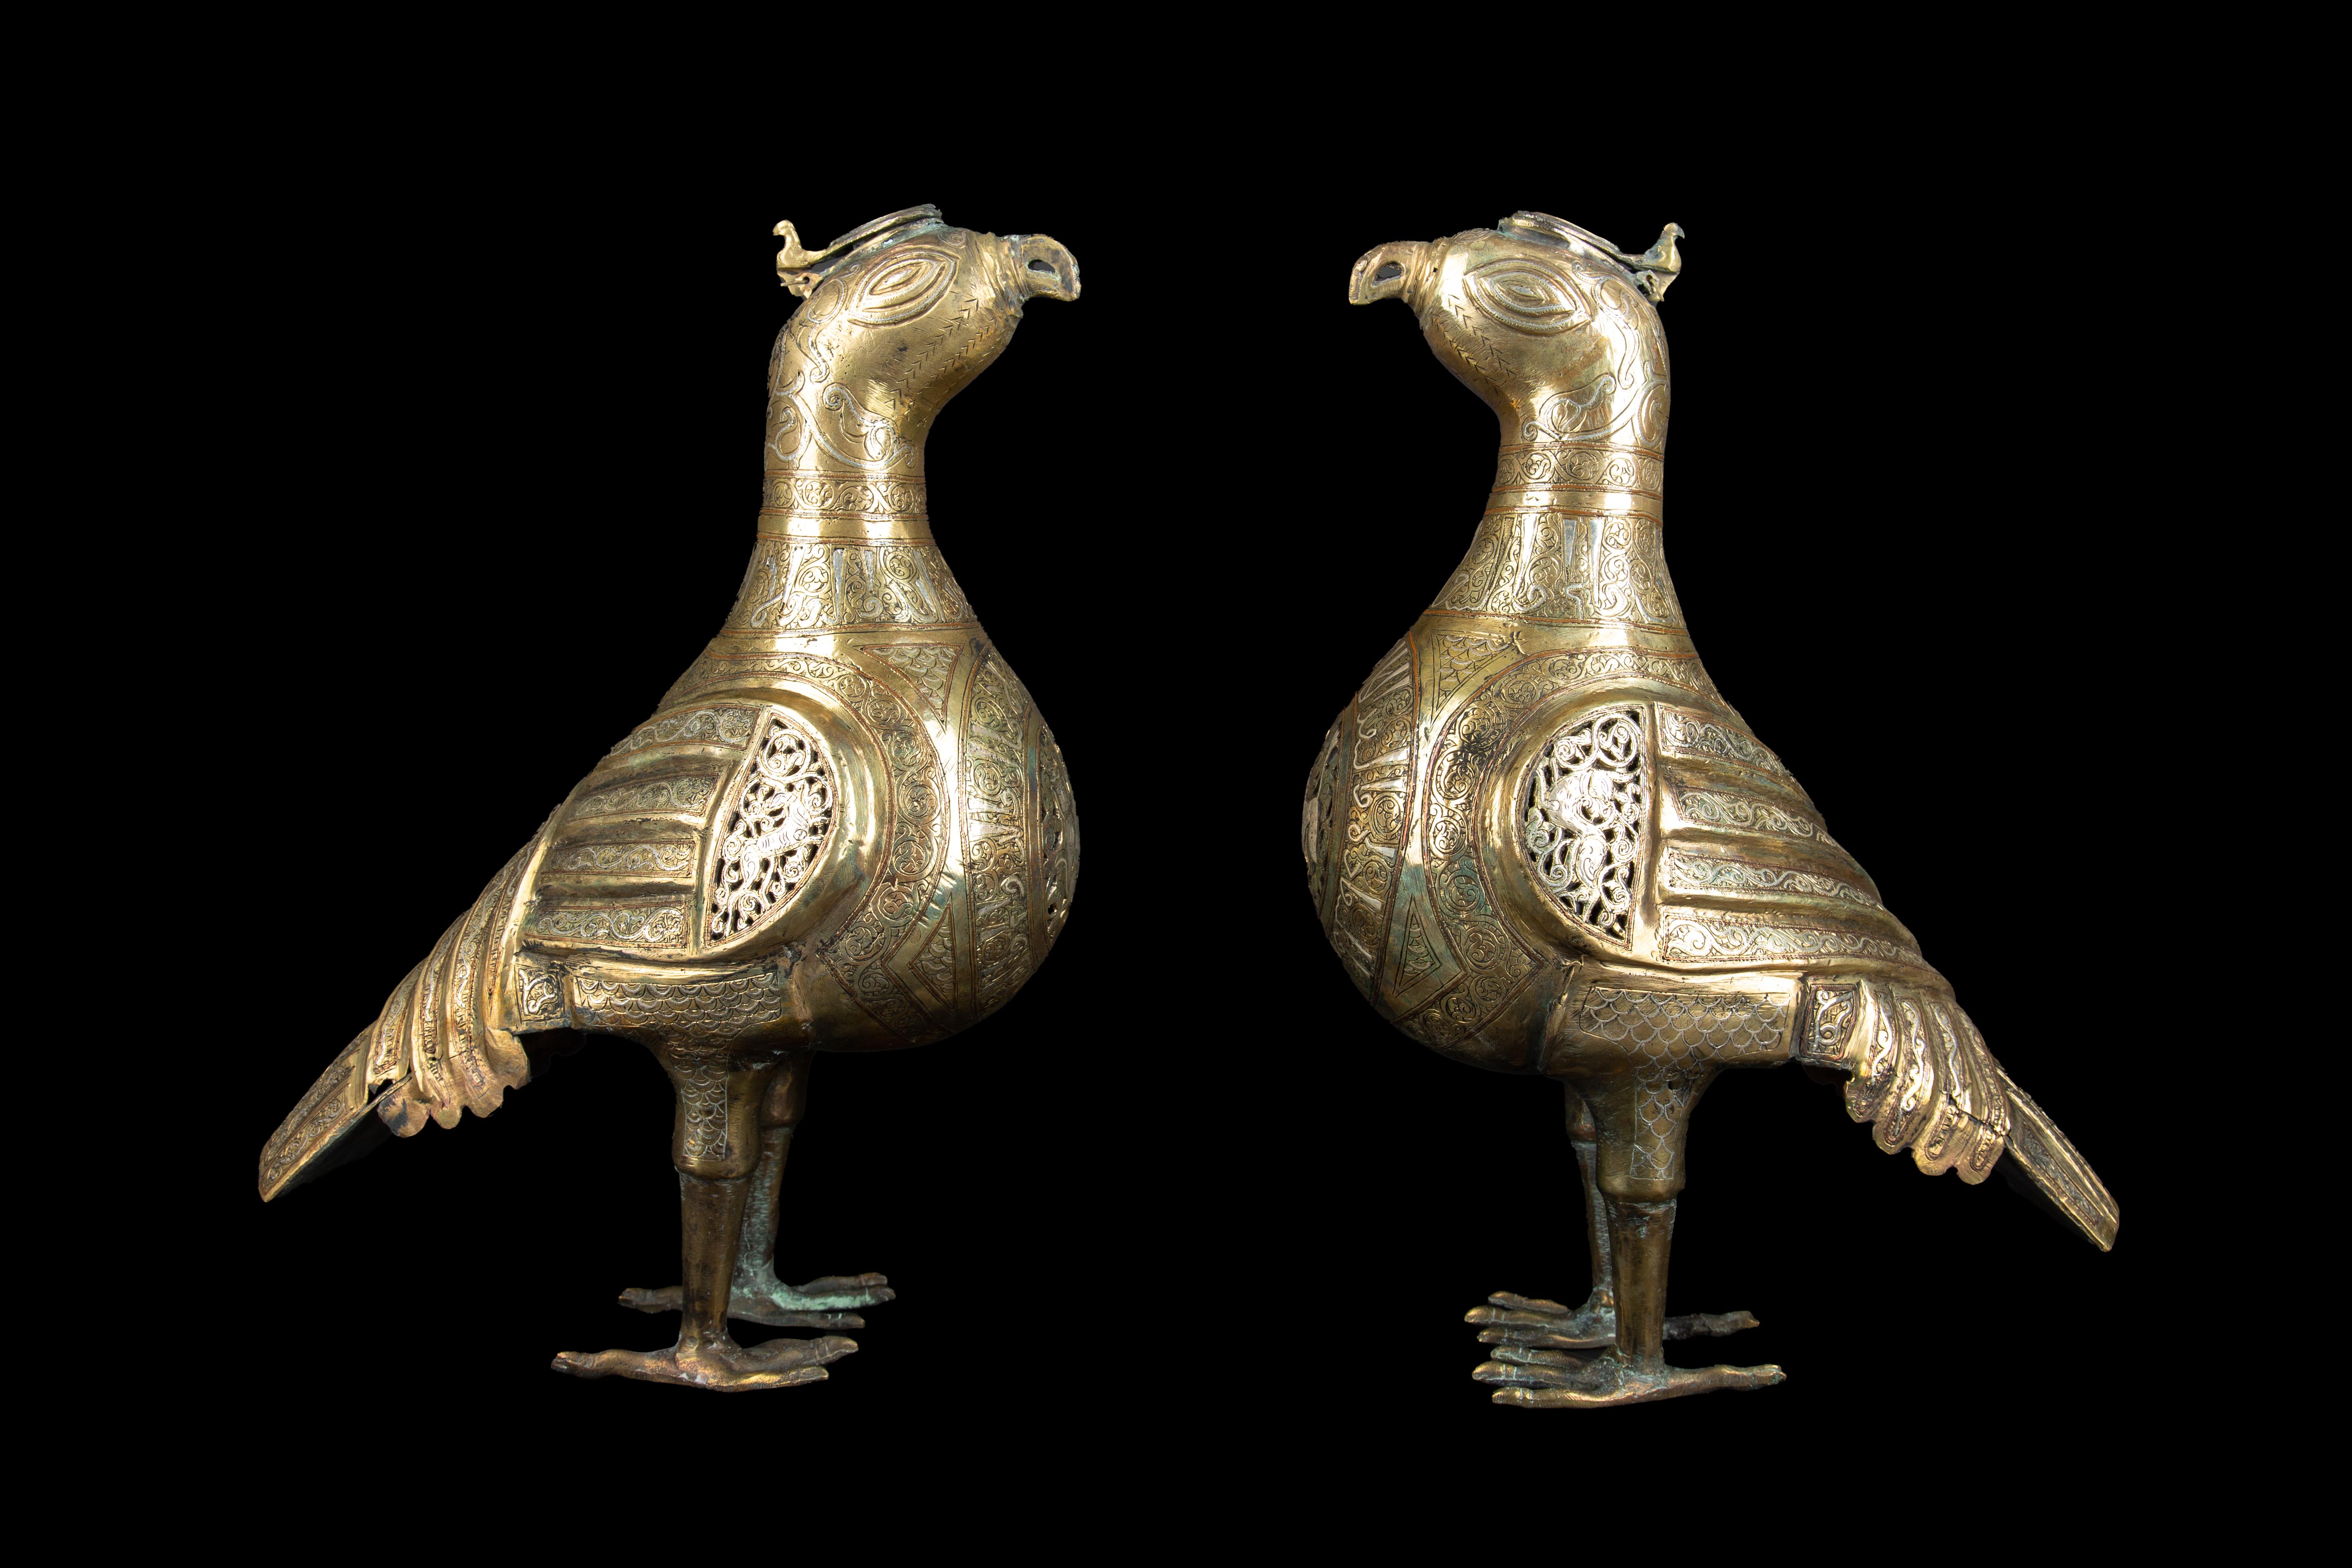 These bird-shaped incense burners were created in the 19th century in Khorasan, a province in northeastern Iran that has a rich history of Islamic art and culture. The burners are made of a mixture of bronze, silver, and copper, which were commonly